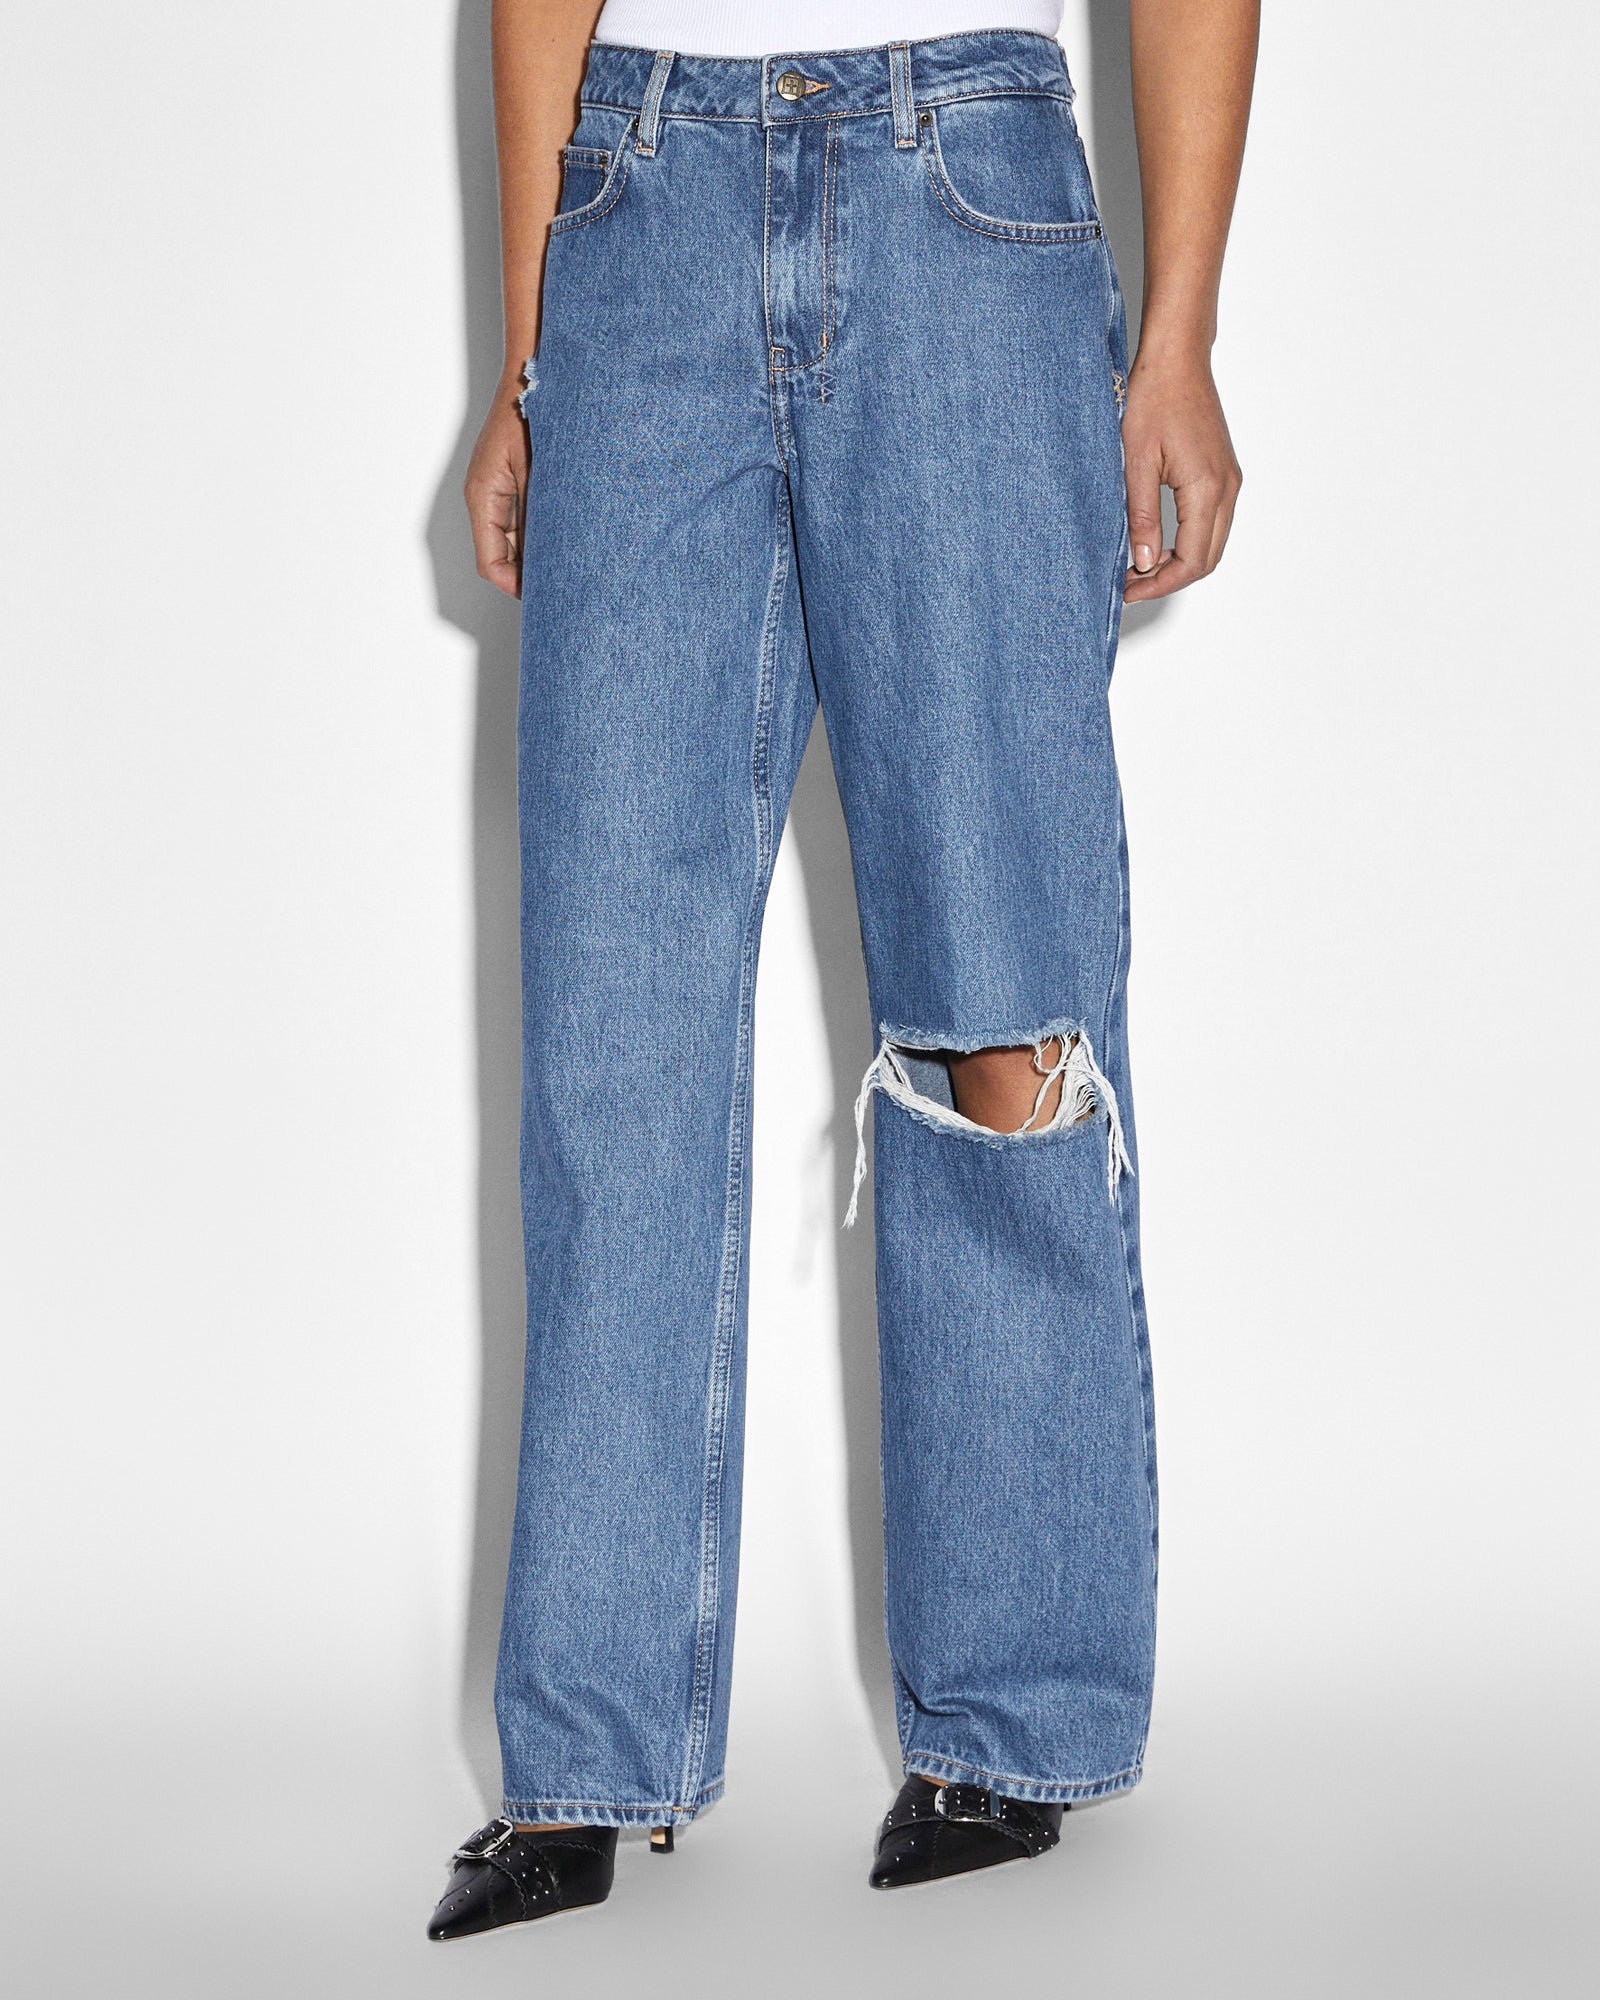 Low Rider Relaxed Fit Ripped Jeans - Mid Blue Denim